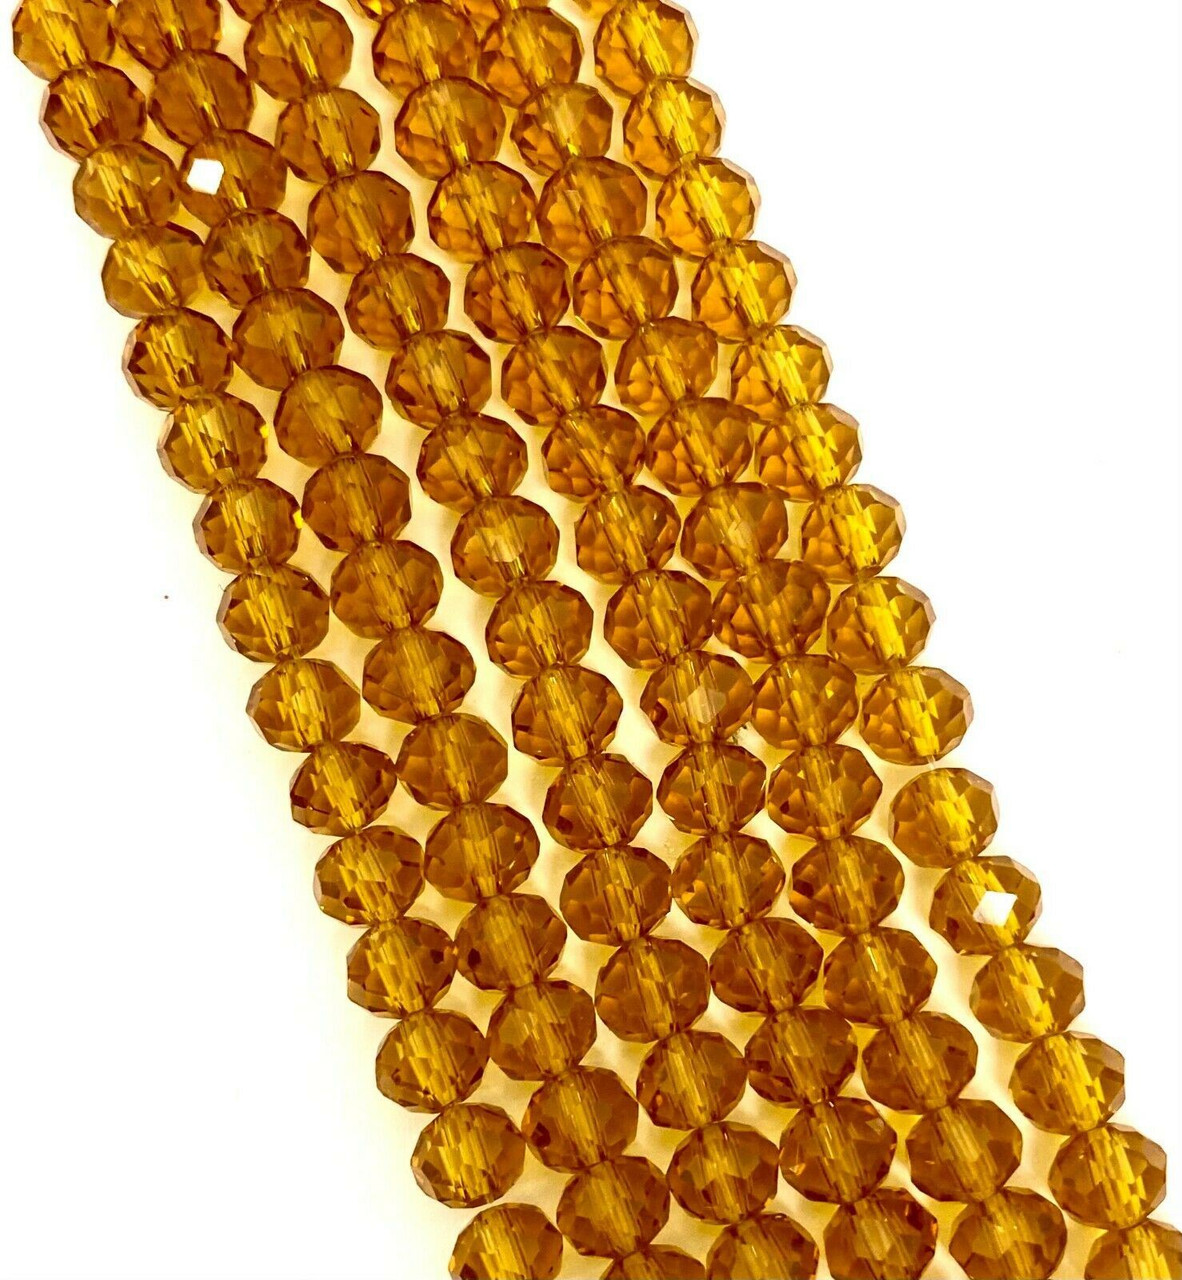 Gold 4x3mm Faceted Glass Rondelles